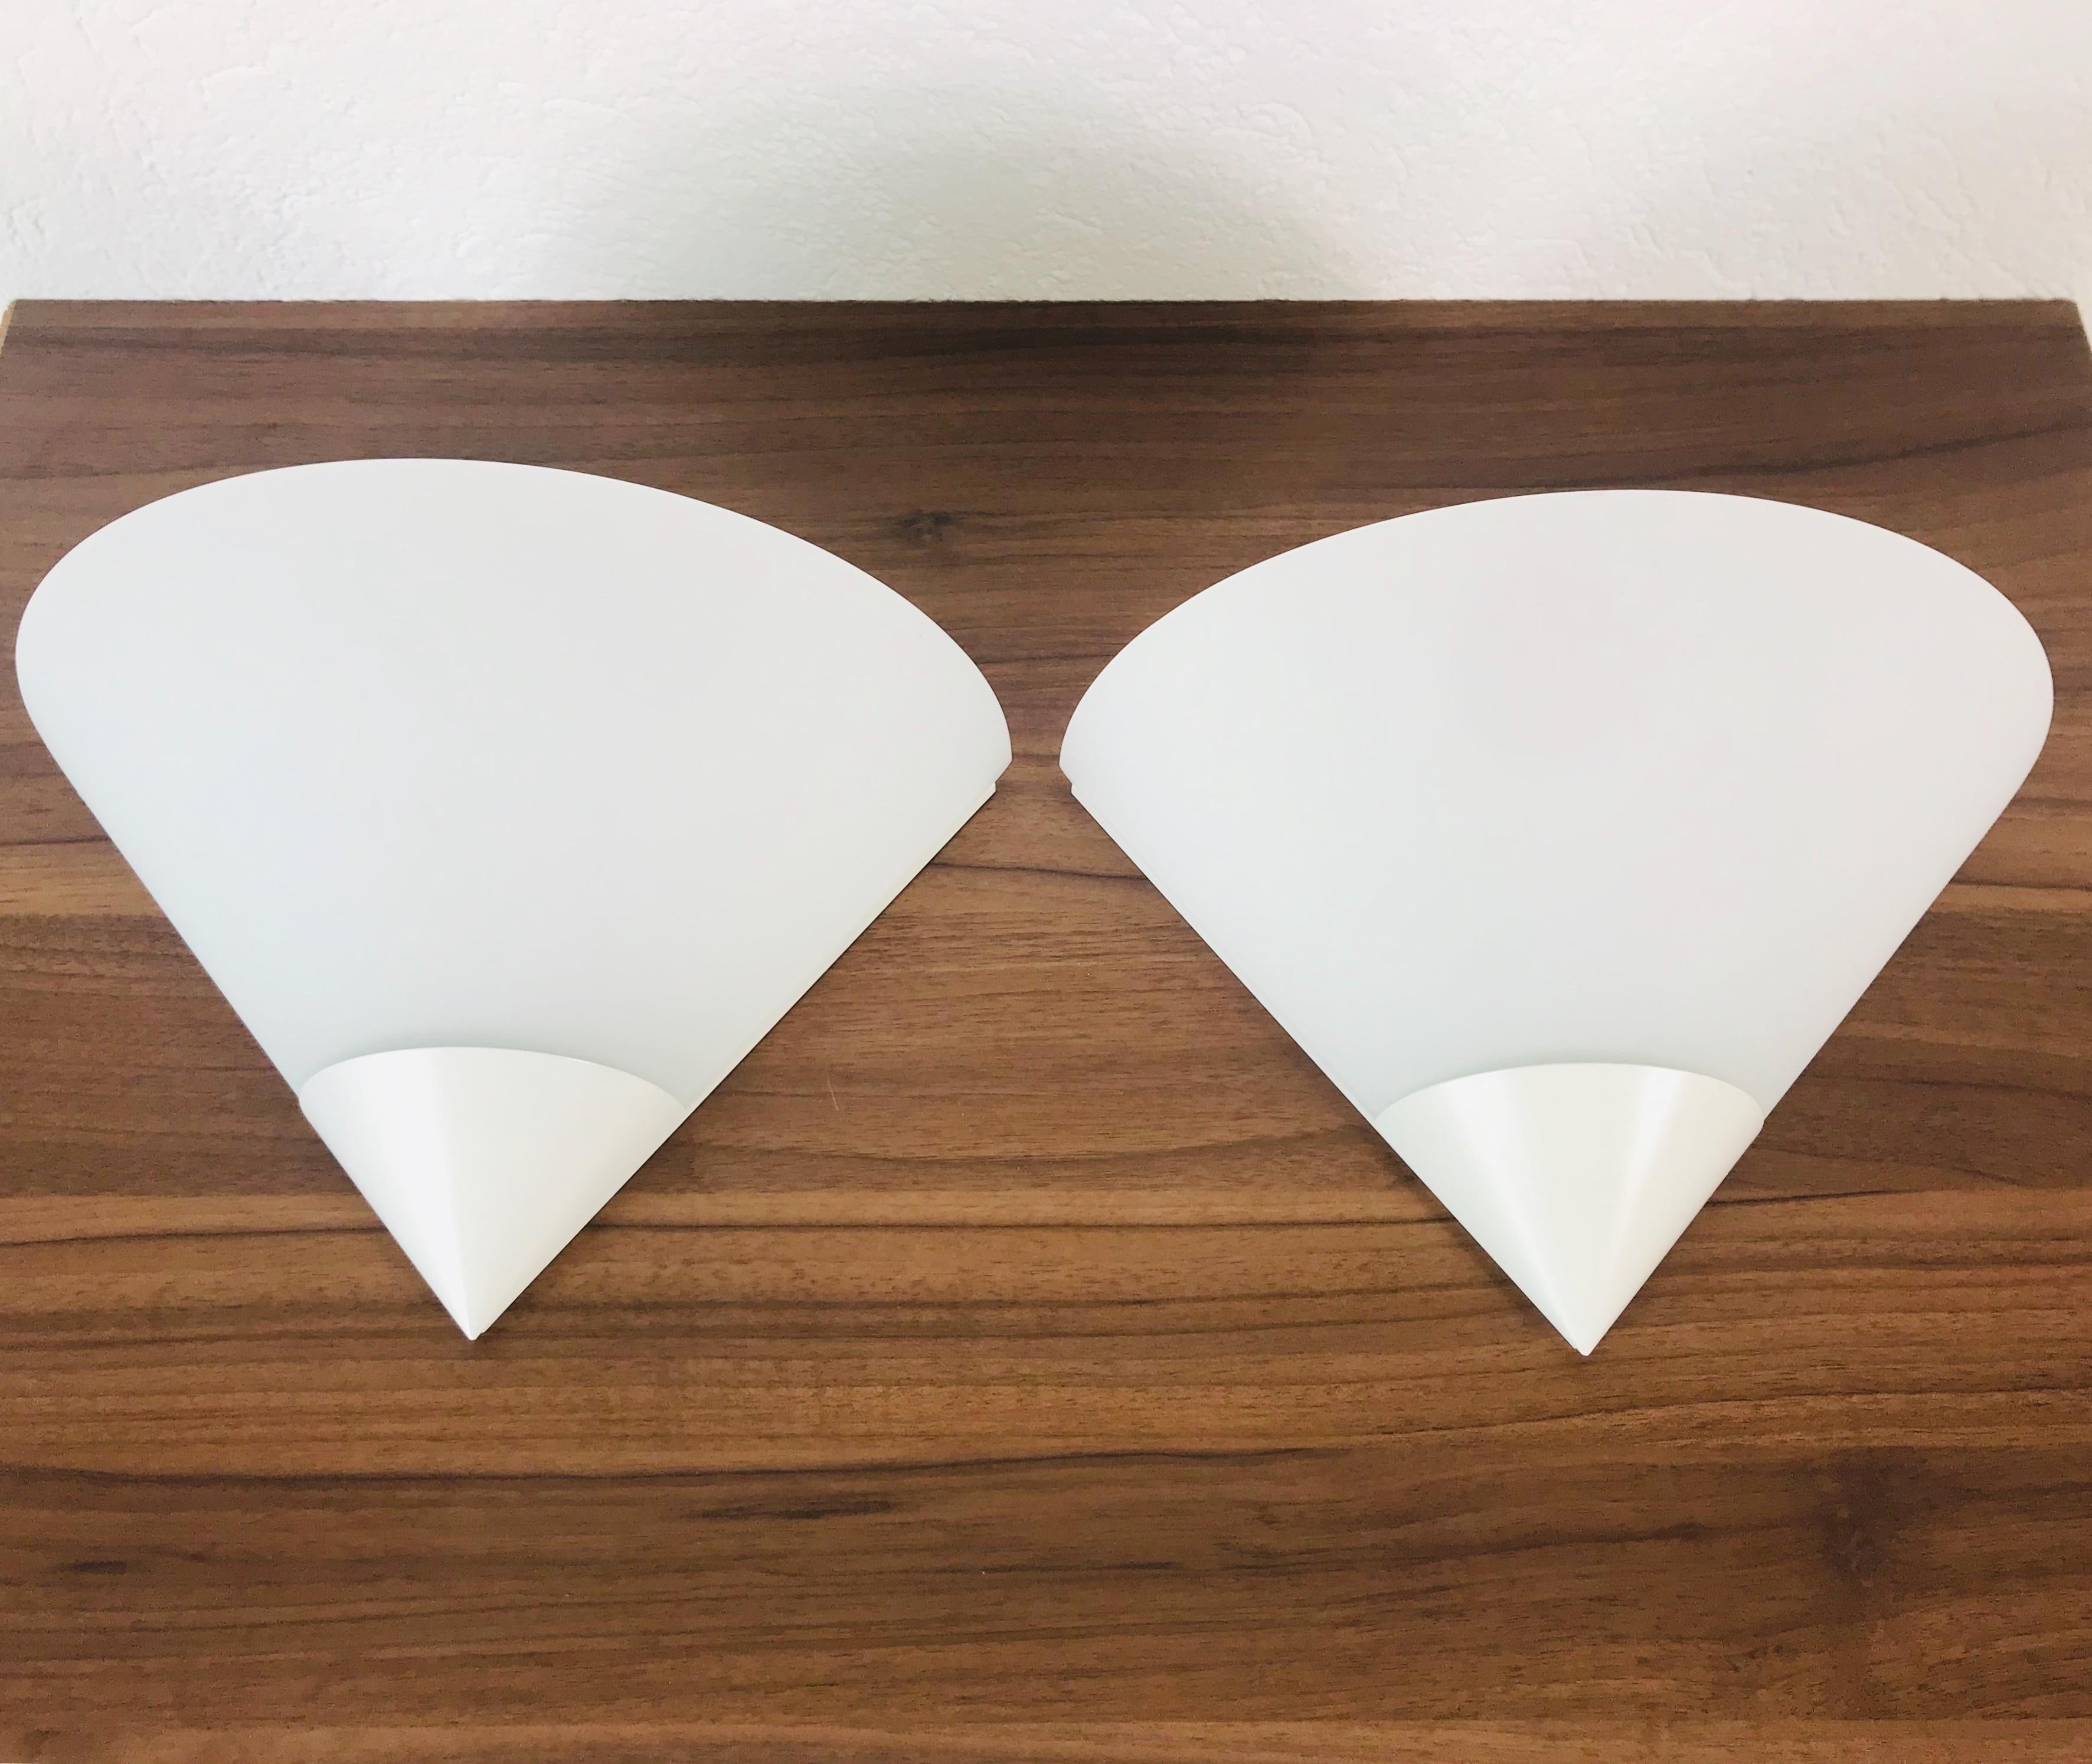 A beautiful pair of Mid-Century Modern wall lamps by Glashütte Limburg made in Germany in the 1970s. It has a beautiful triangle shape and is made of aluminium and opaline glass. The back is white metal.

The light requires one E27 light bulb.